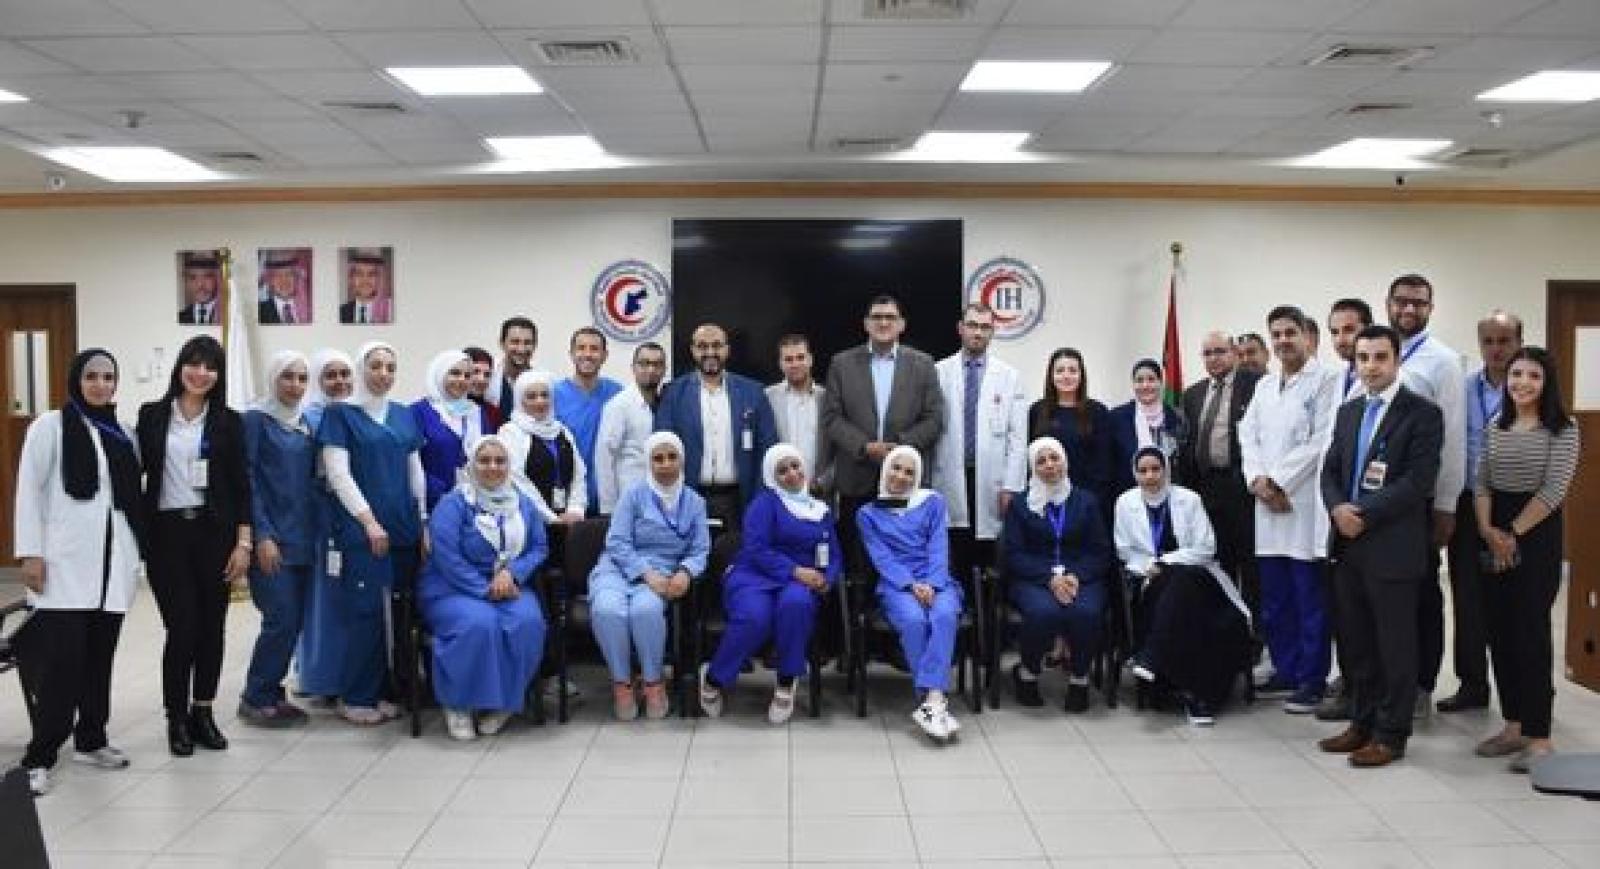 On the occasion of World Nursing Day, Istiqlal Hospital toured the hospital and visited the nursing staff at its site in recognition of their efforts.